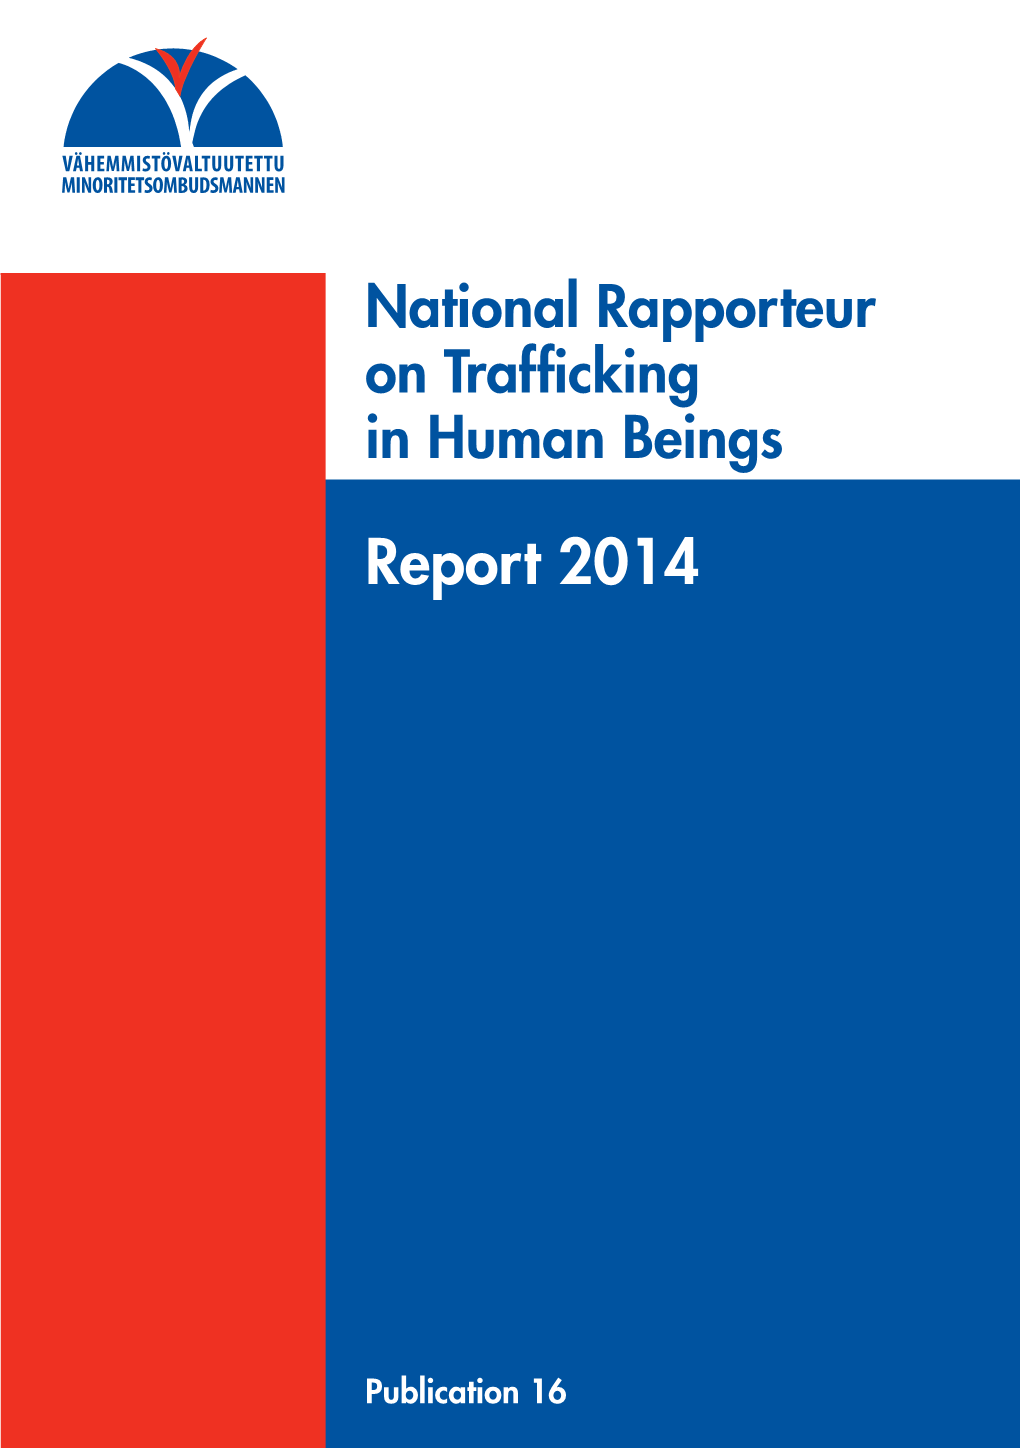 National Rapporteur on Trafficking in Human Beings Report 2014